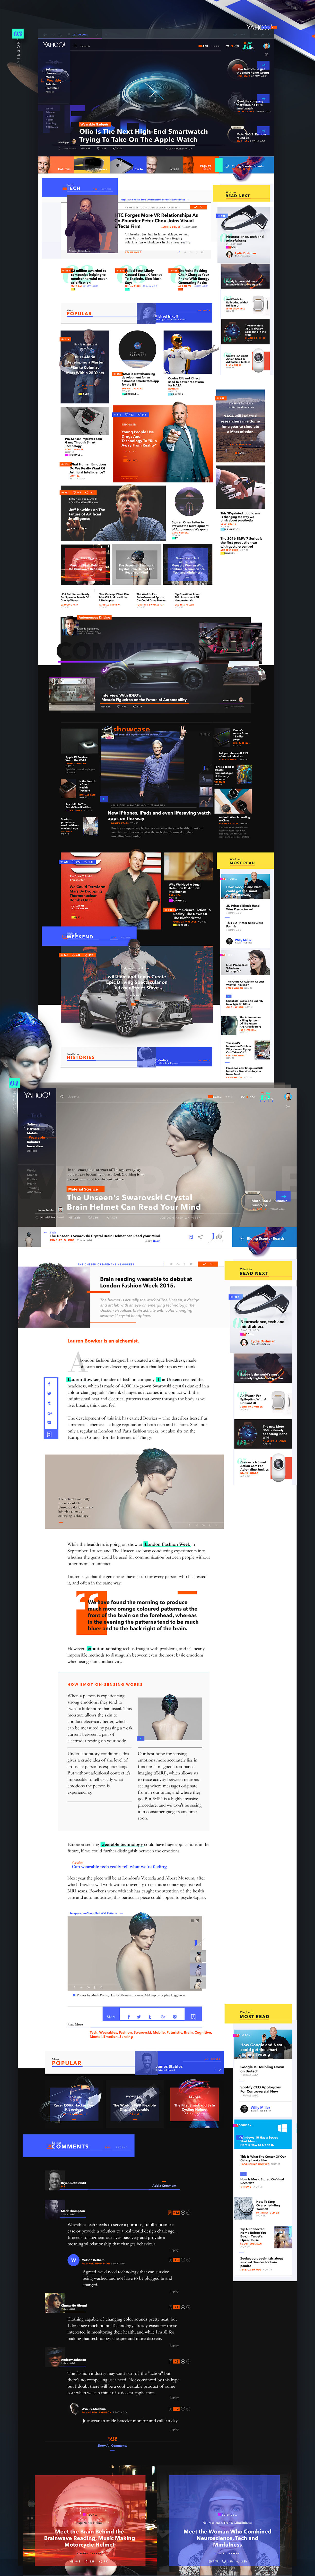 Yahoo! design news Technology science mobile articles Costa Rica UI ux Web interaction redesign